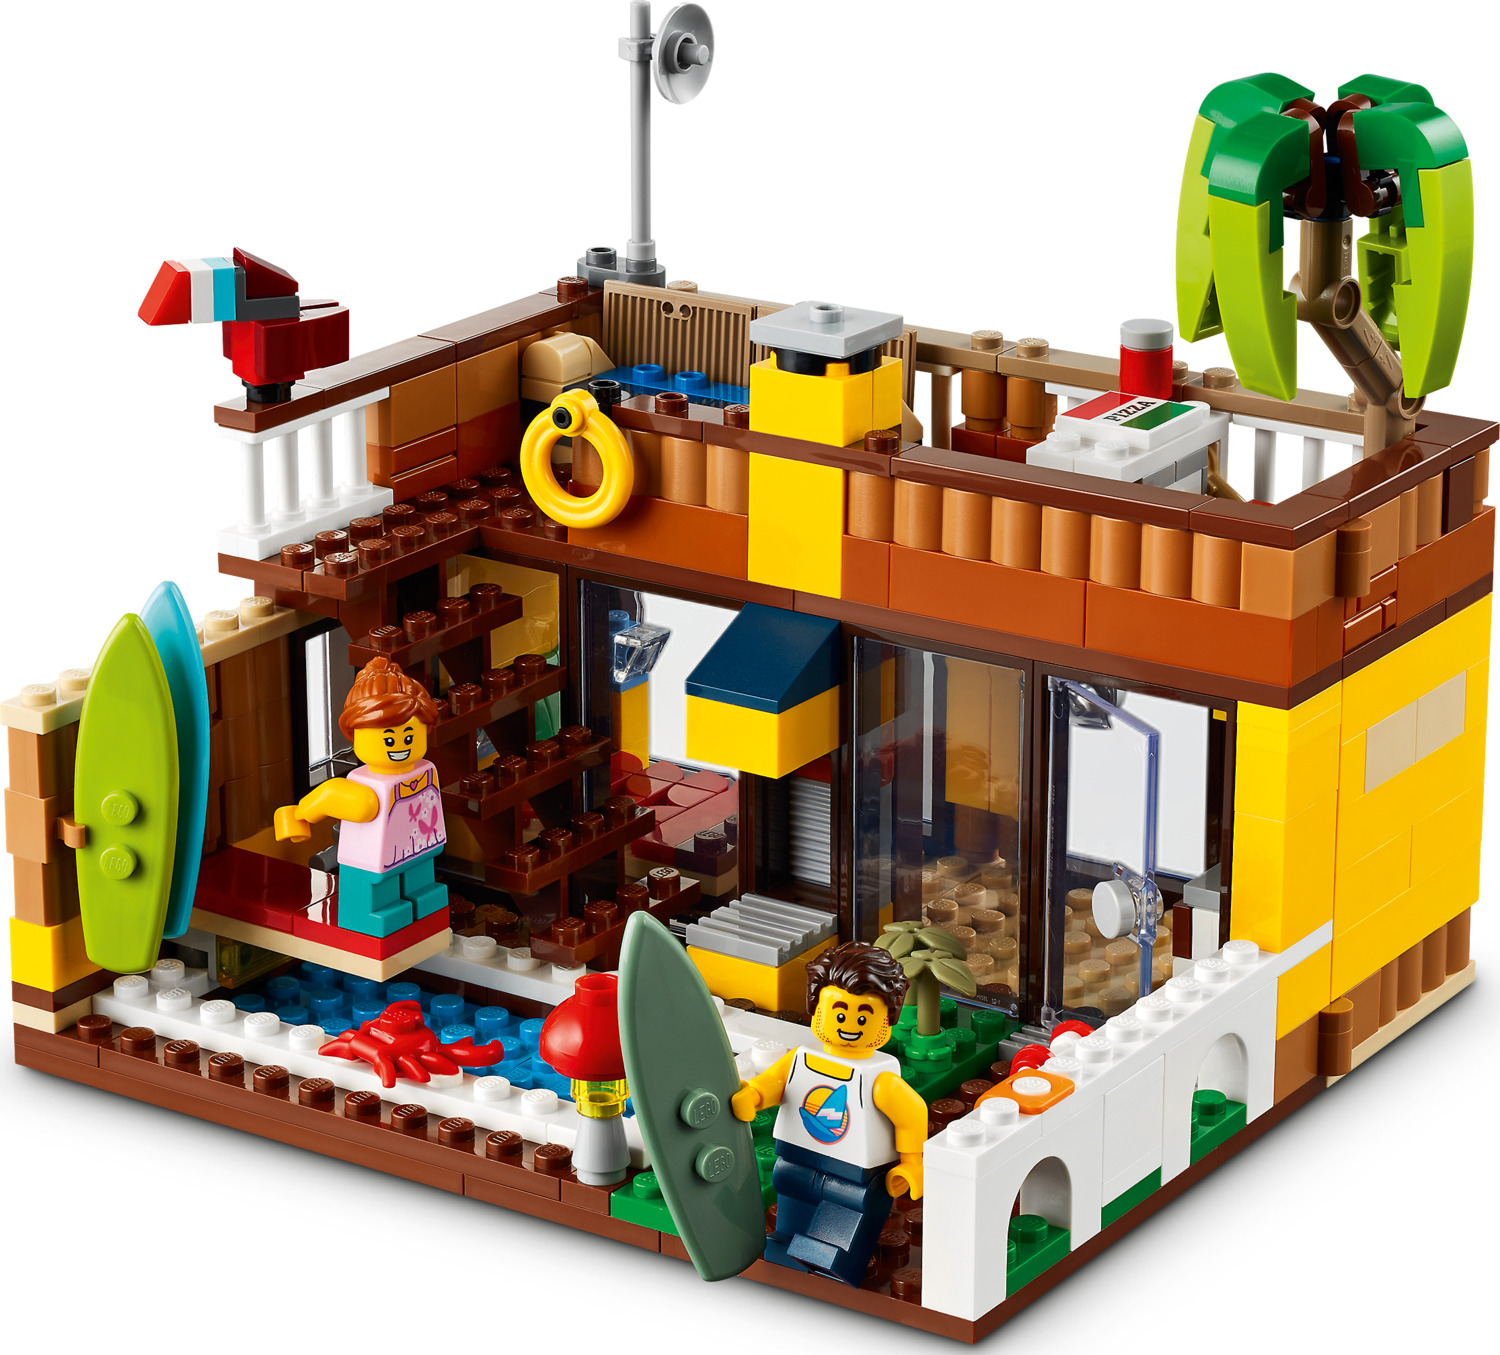 Creator 3-in-1: Surfer Beach House – Awesome Toys Gifts